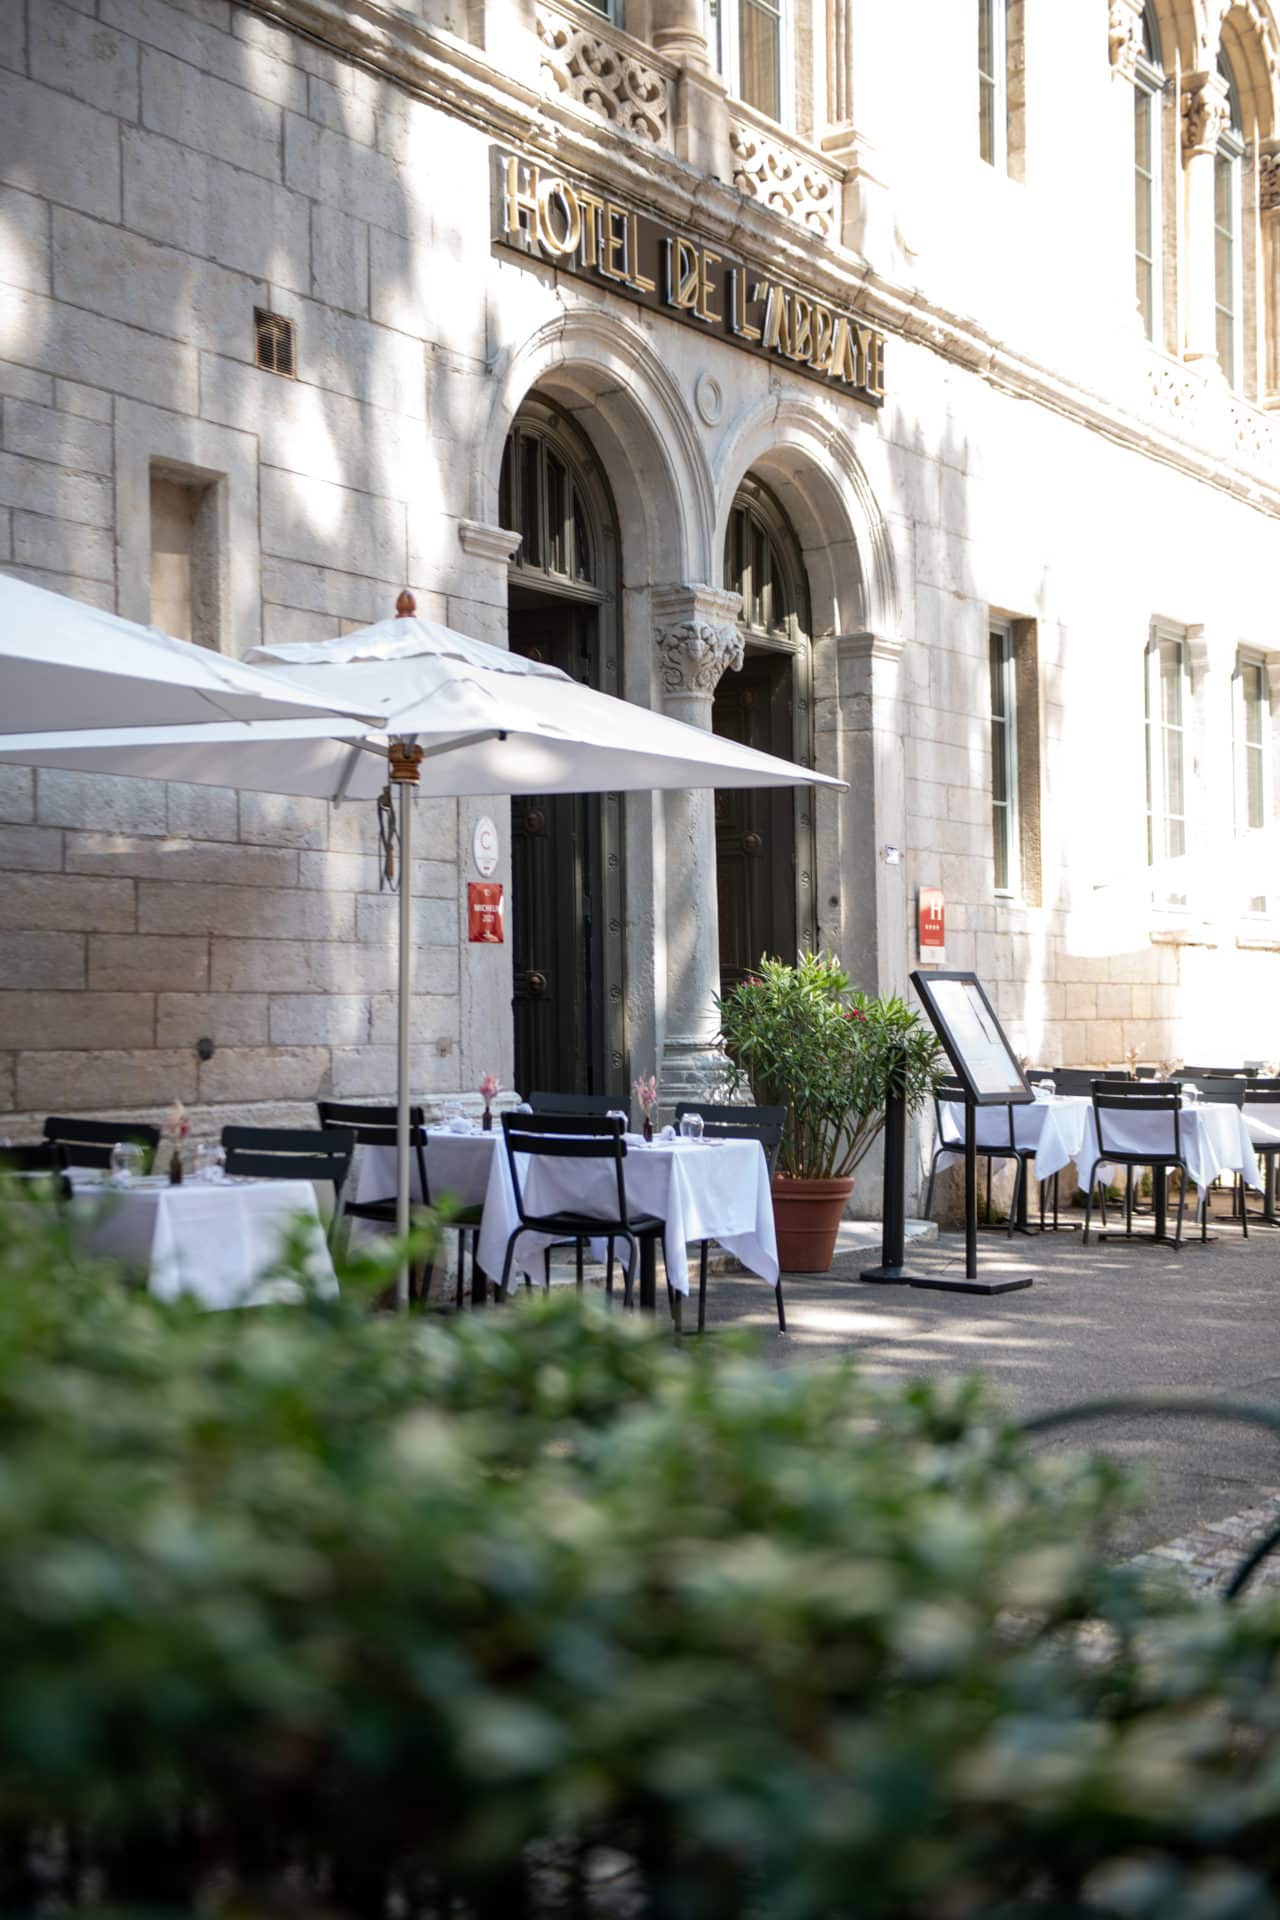 With family, friends or professionals, come and enjoy a relaxing moment on the terrace